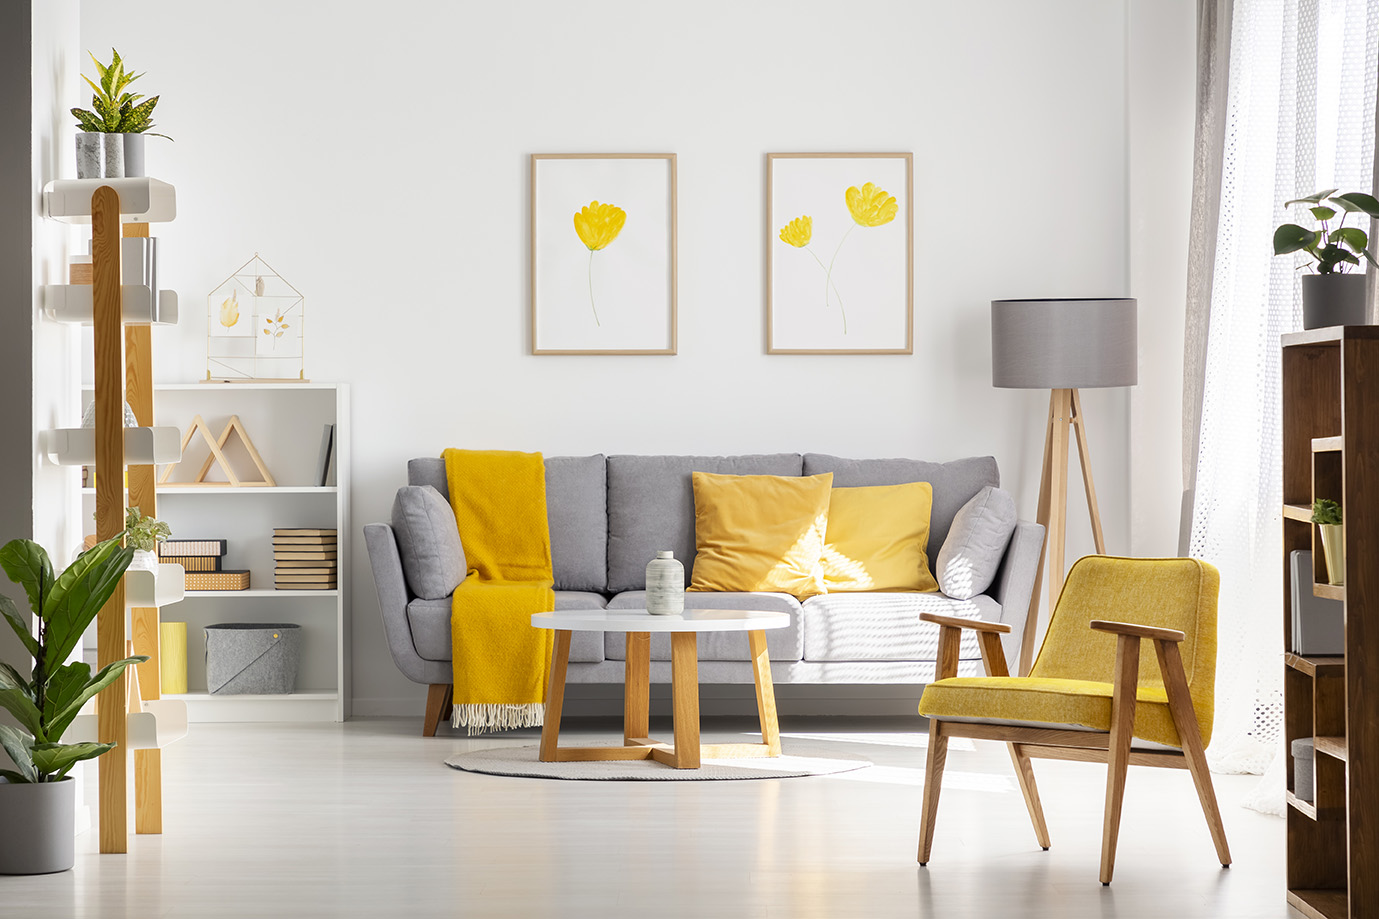 Yellow wooden armchair in bright living room interior with poste